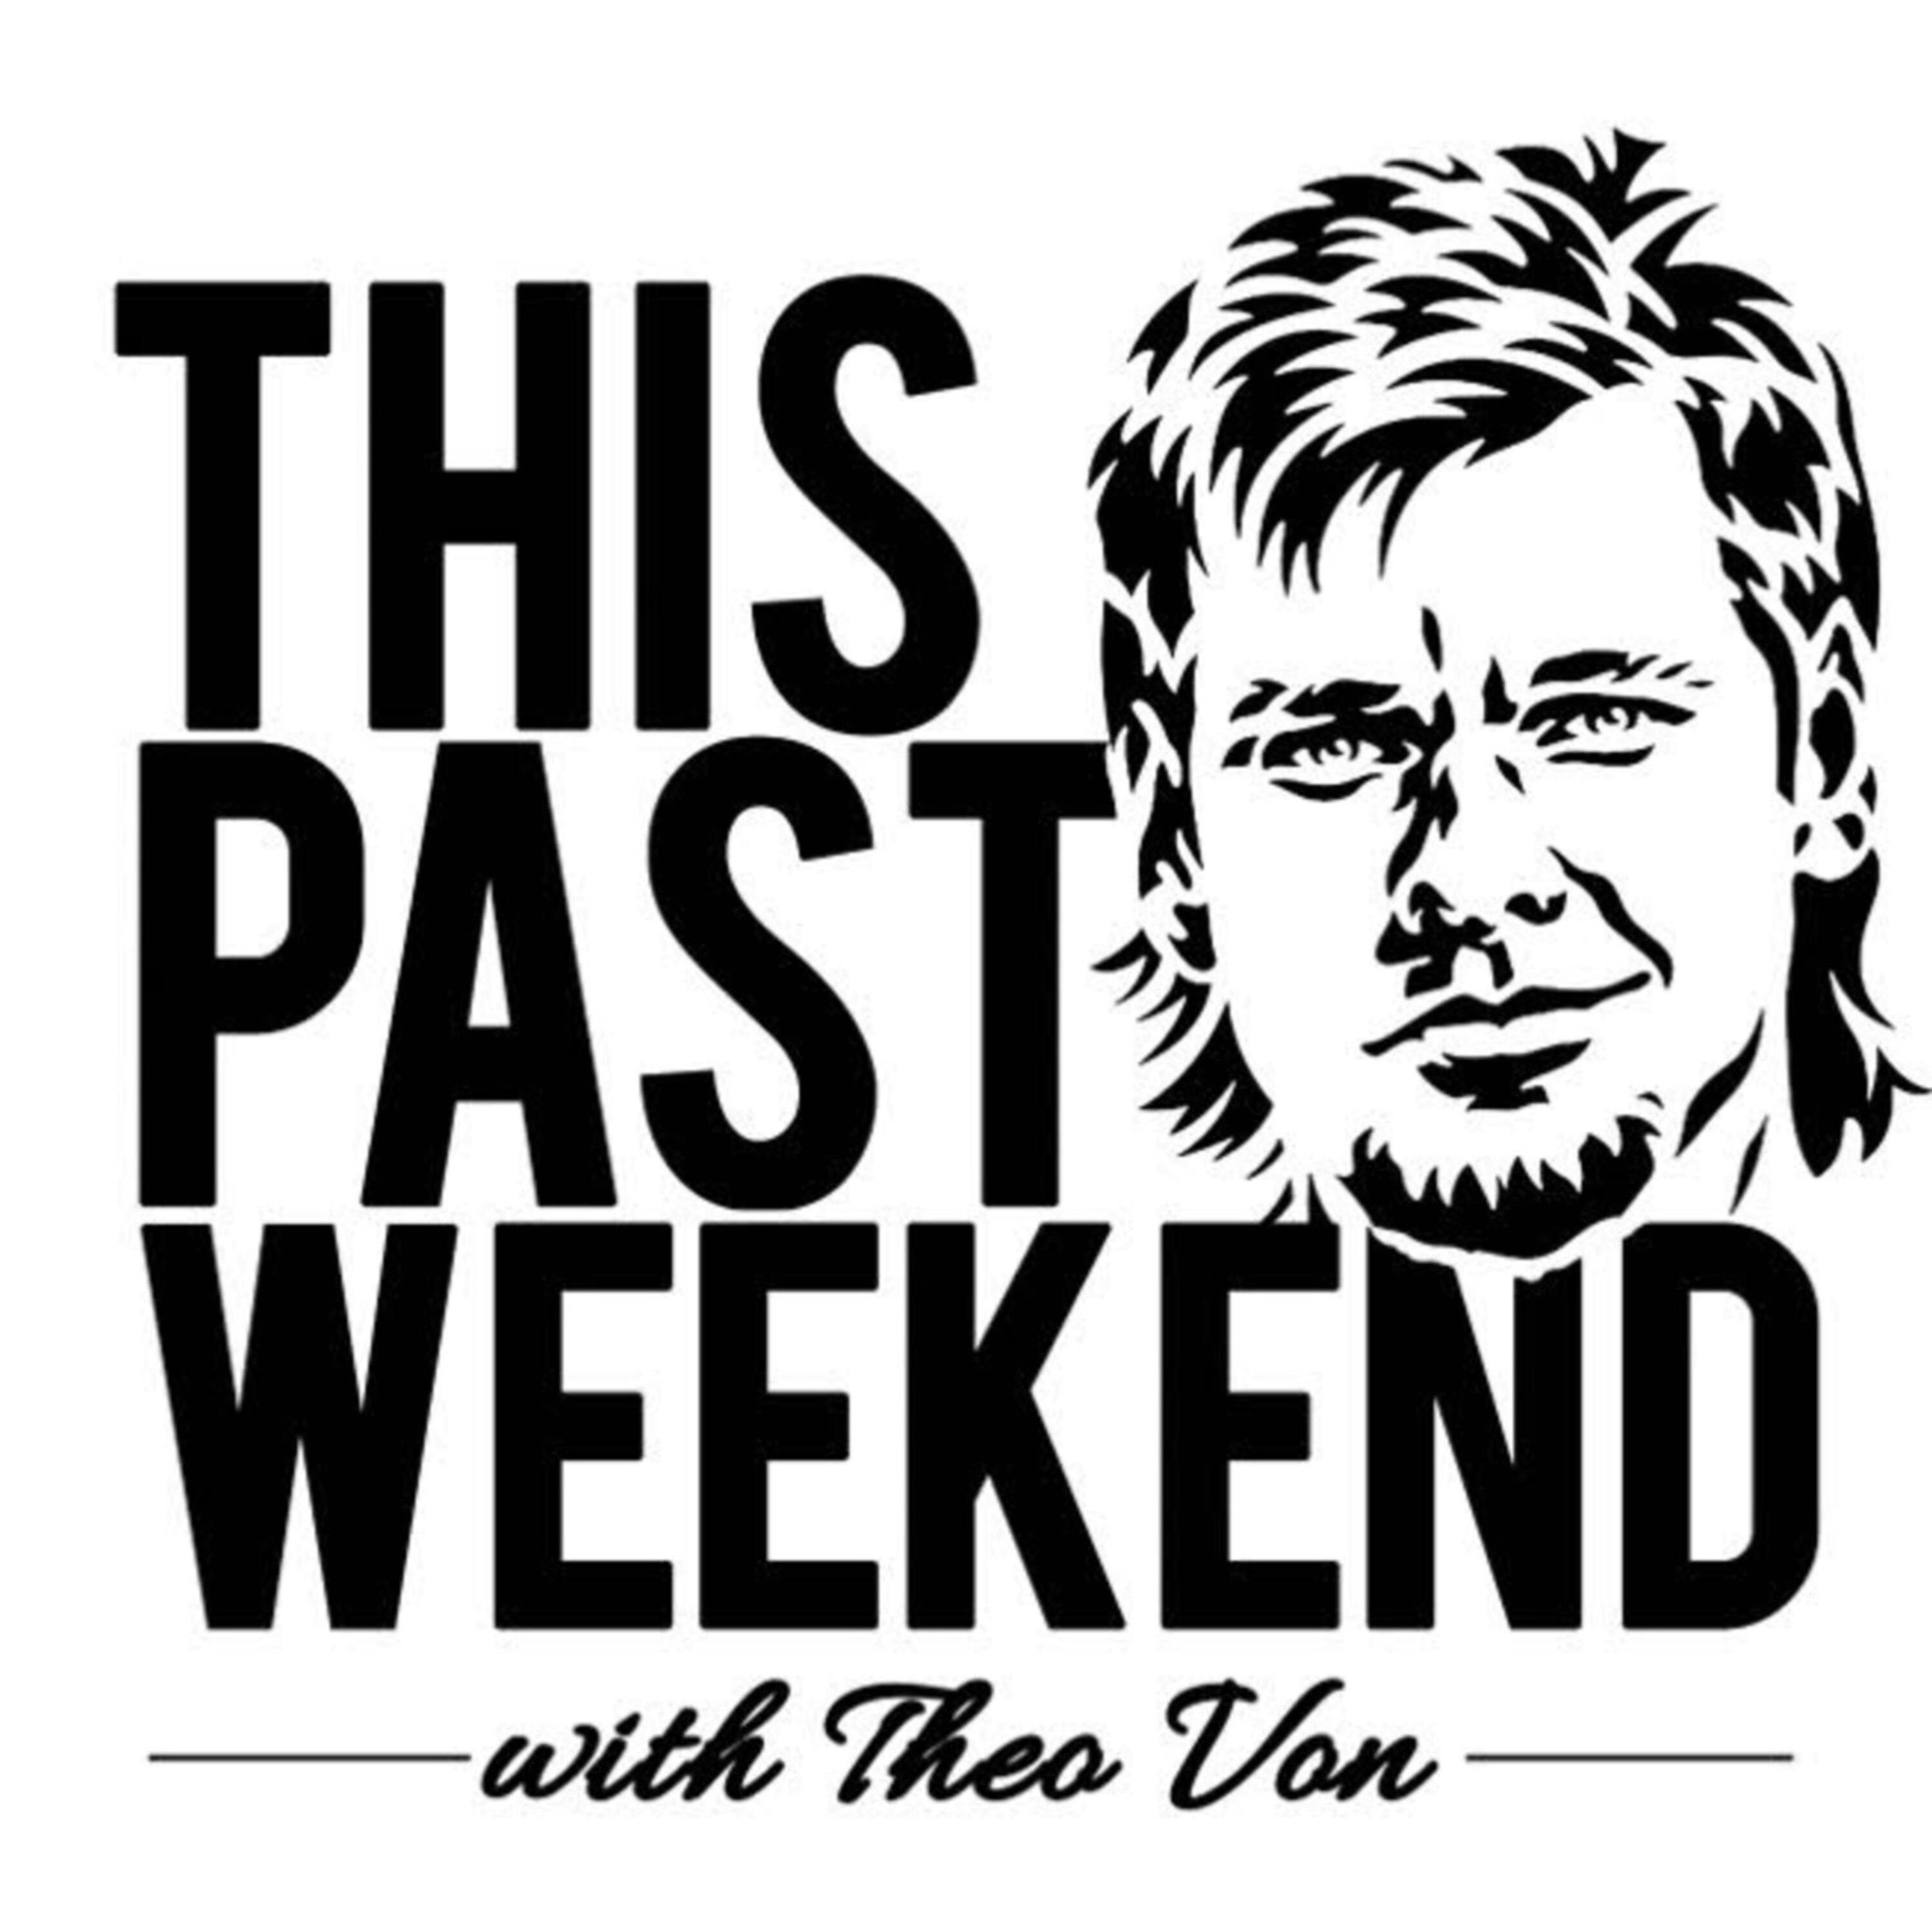 Duncan Trussell | This Past Weekend #112 by Theo Von